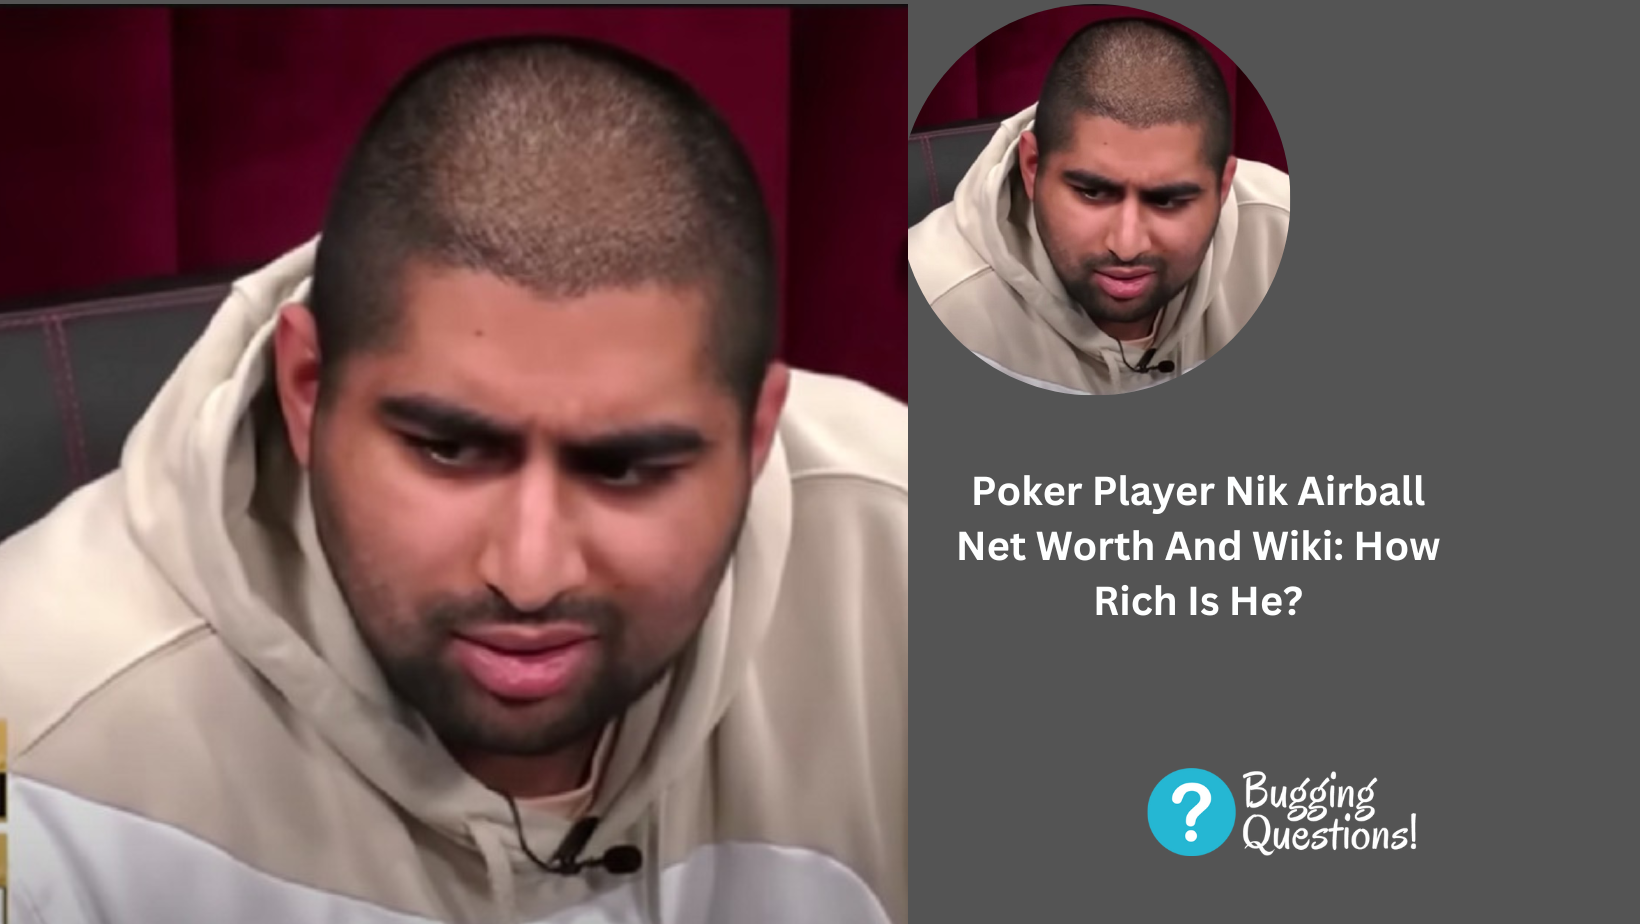 Poker Player Nik Airball Net Worth And Wiki: How Rich Is He?